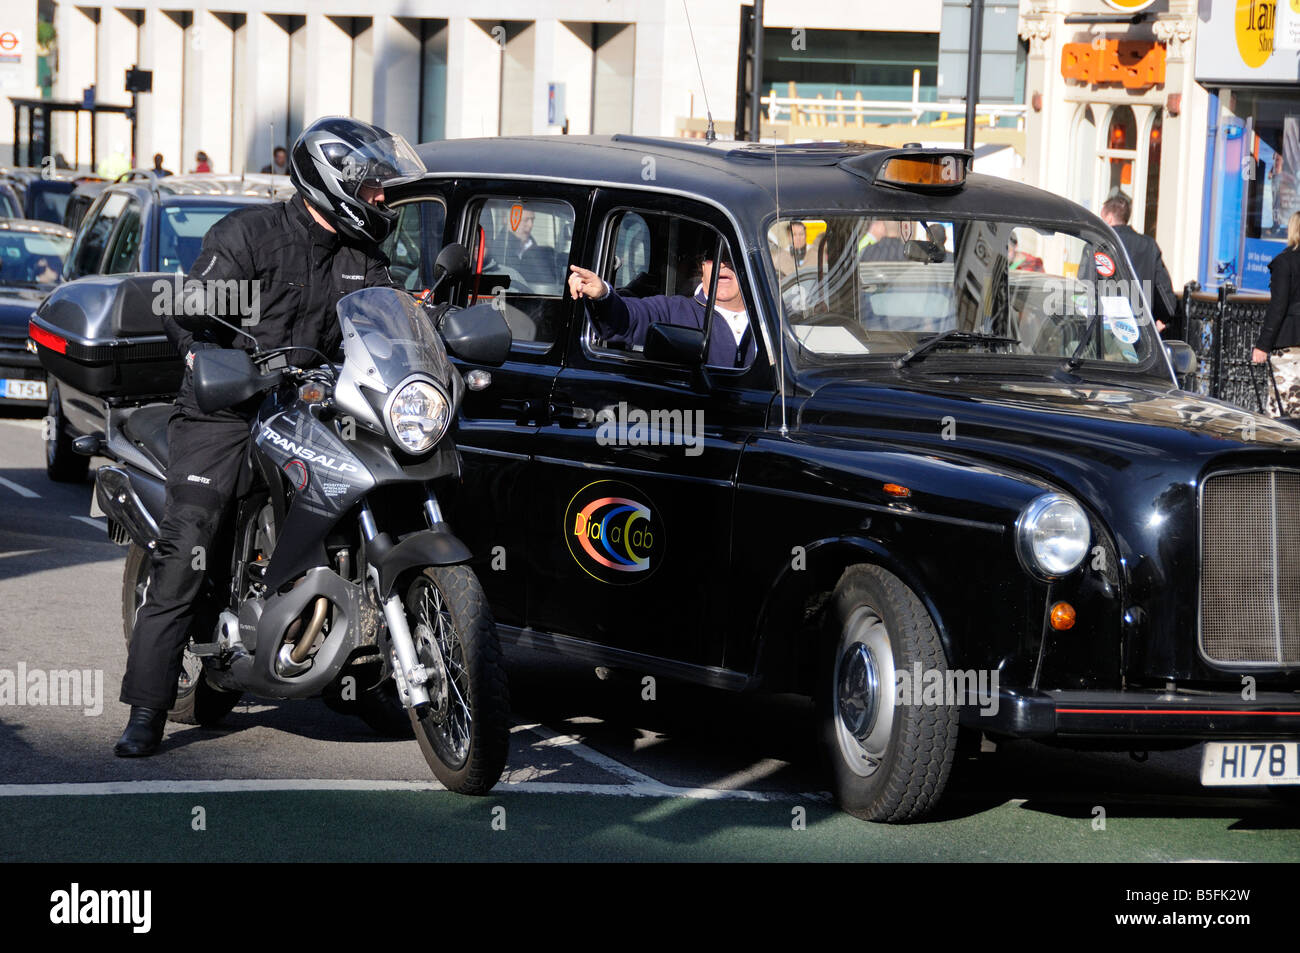 A taxi driver giving directions to a motorcyclist, Ludgate Circus, London, UK Stock Photo